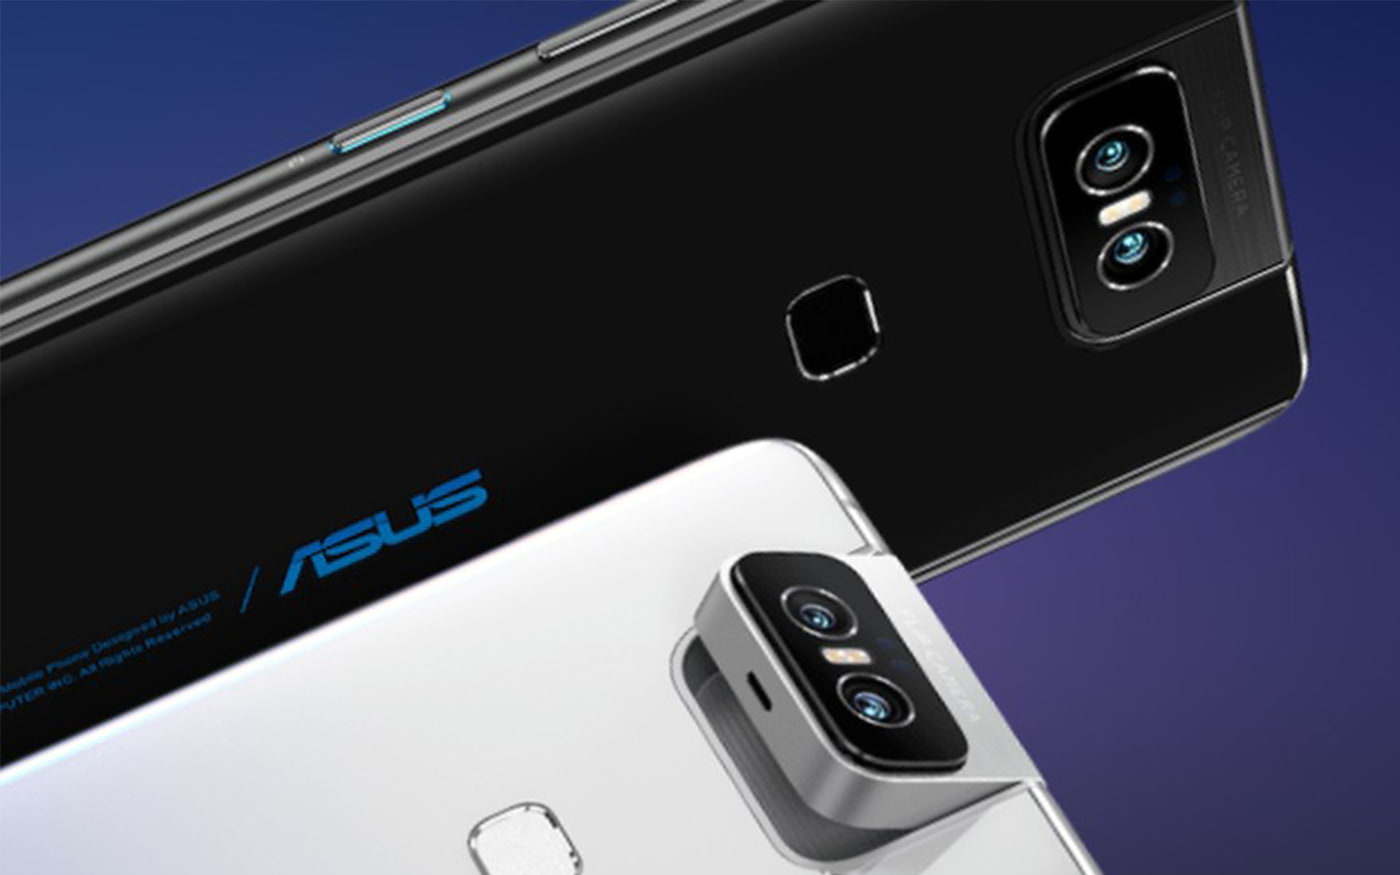 Zenfone 6 receives February security patch and new privacy feature